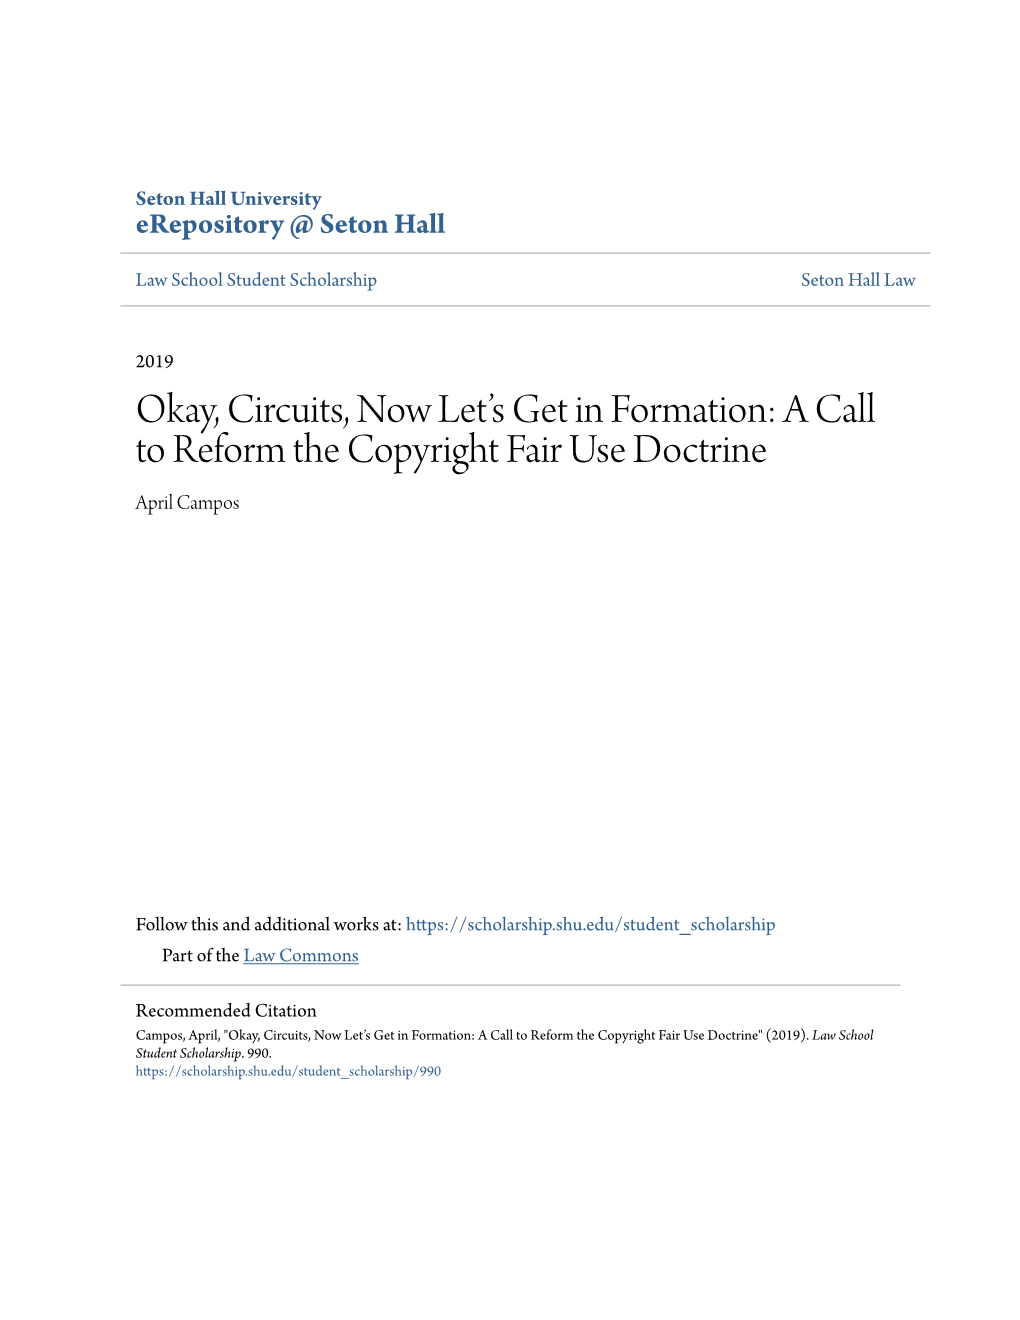 Okay, Circuits, Now Let's Get in Formation: a Call to Reform the Copyright Fair Use Doctrine